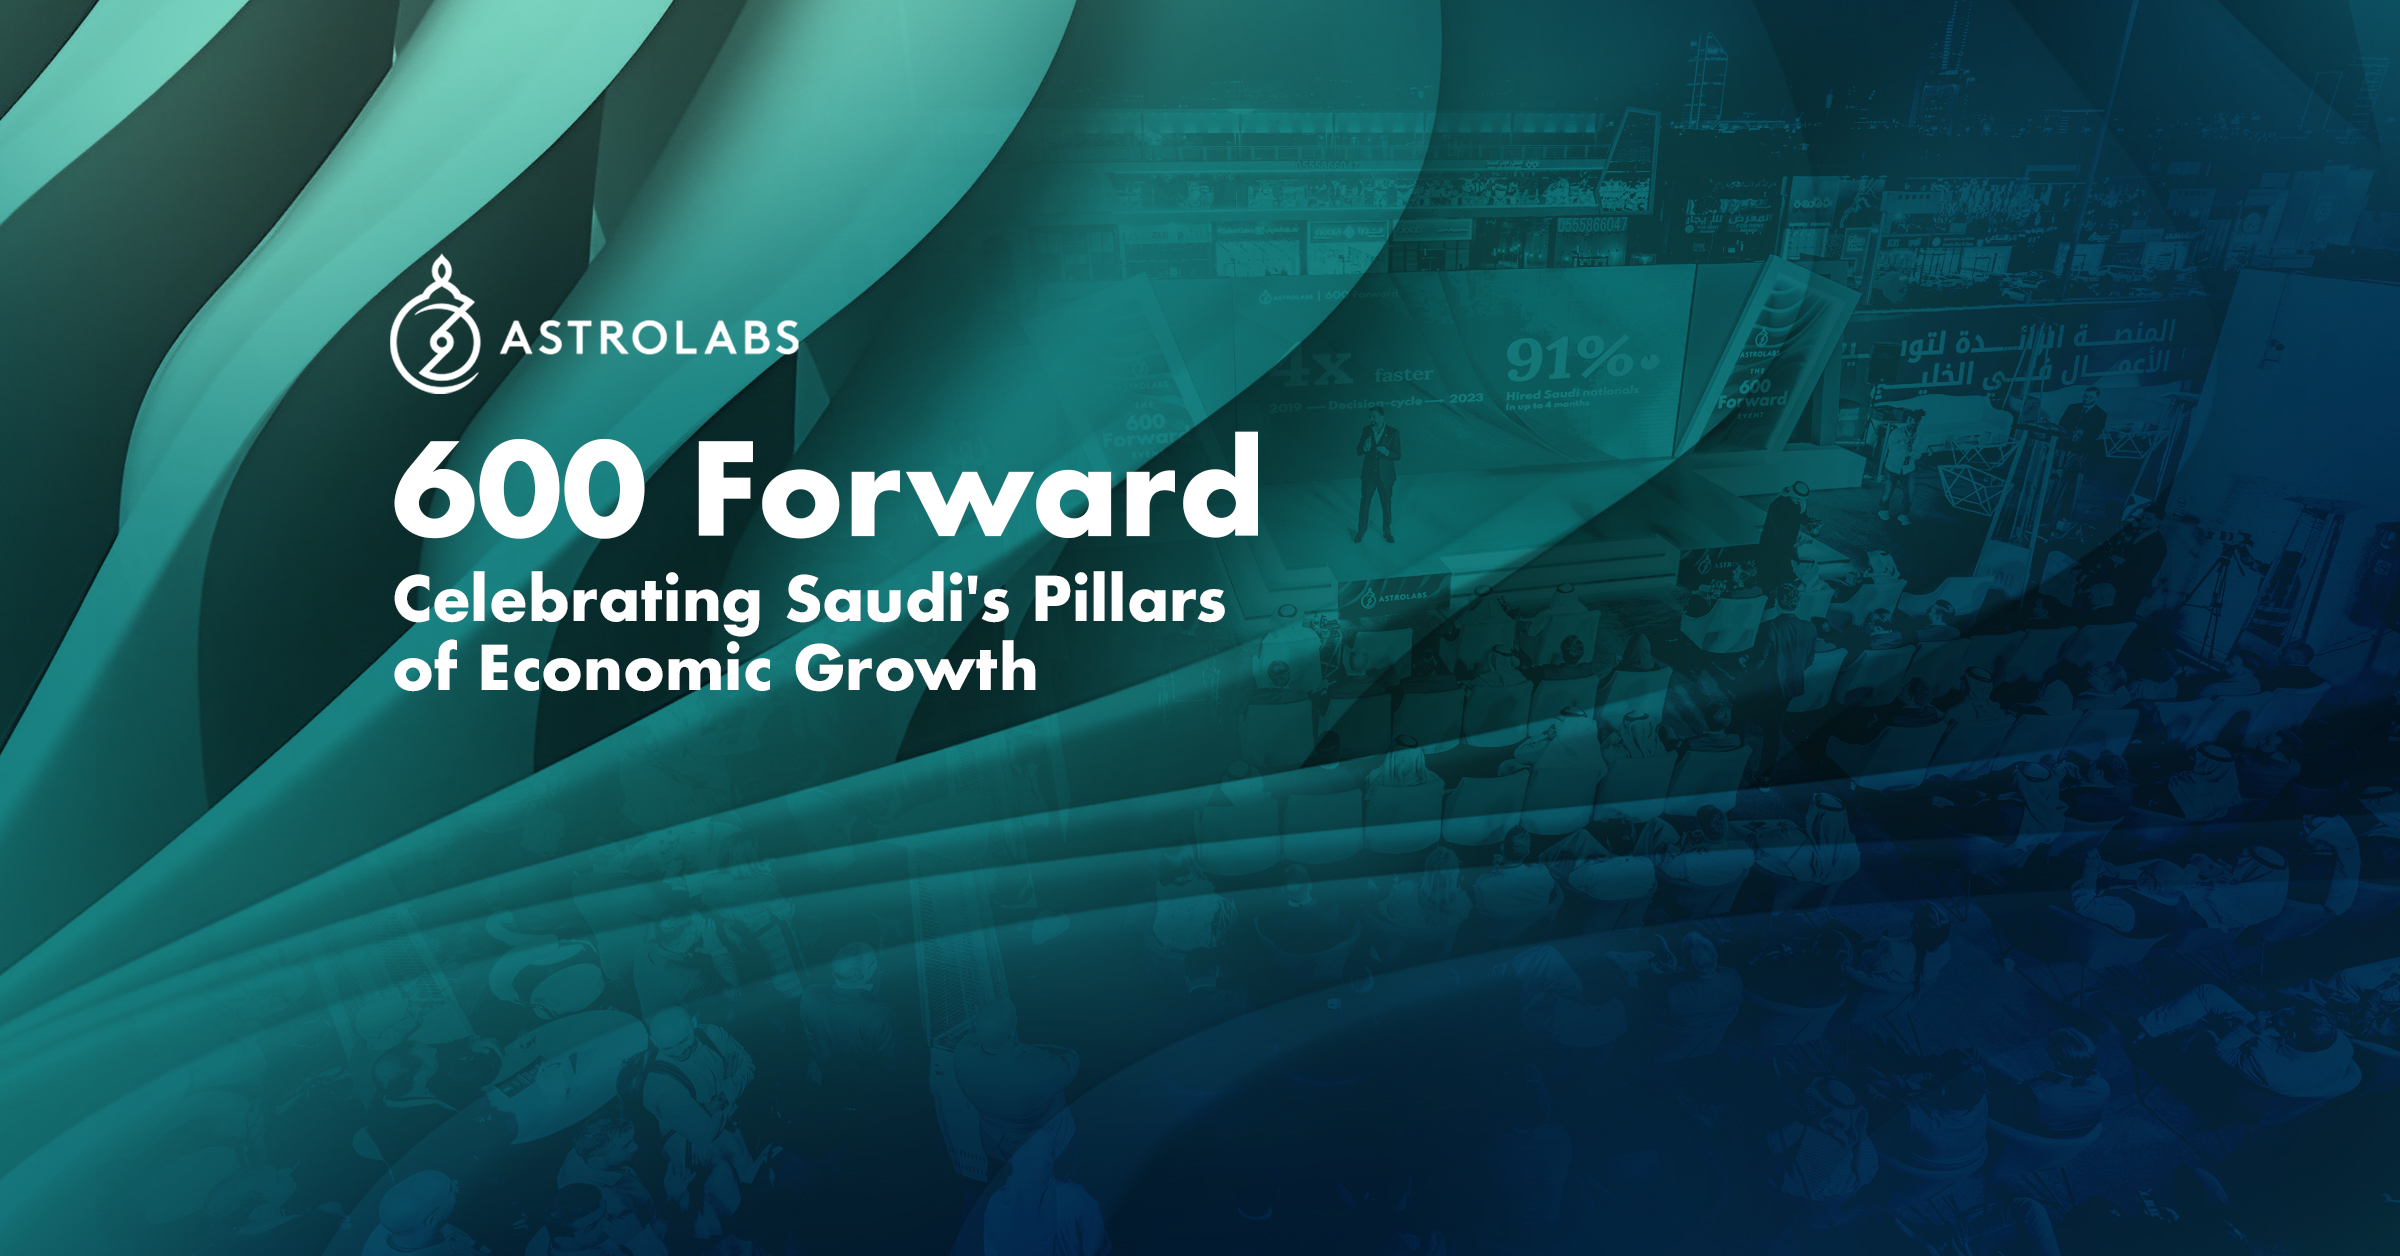 AstroLabs 600 Forward event banner which celebrated the Saudi Market entry of 600 companies in 5 years